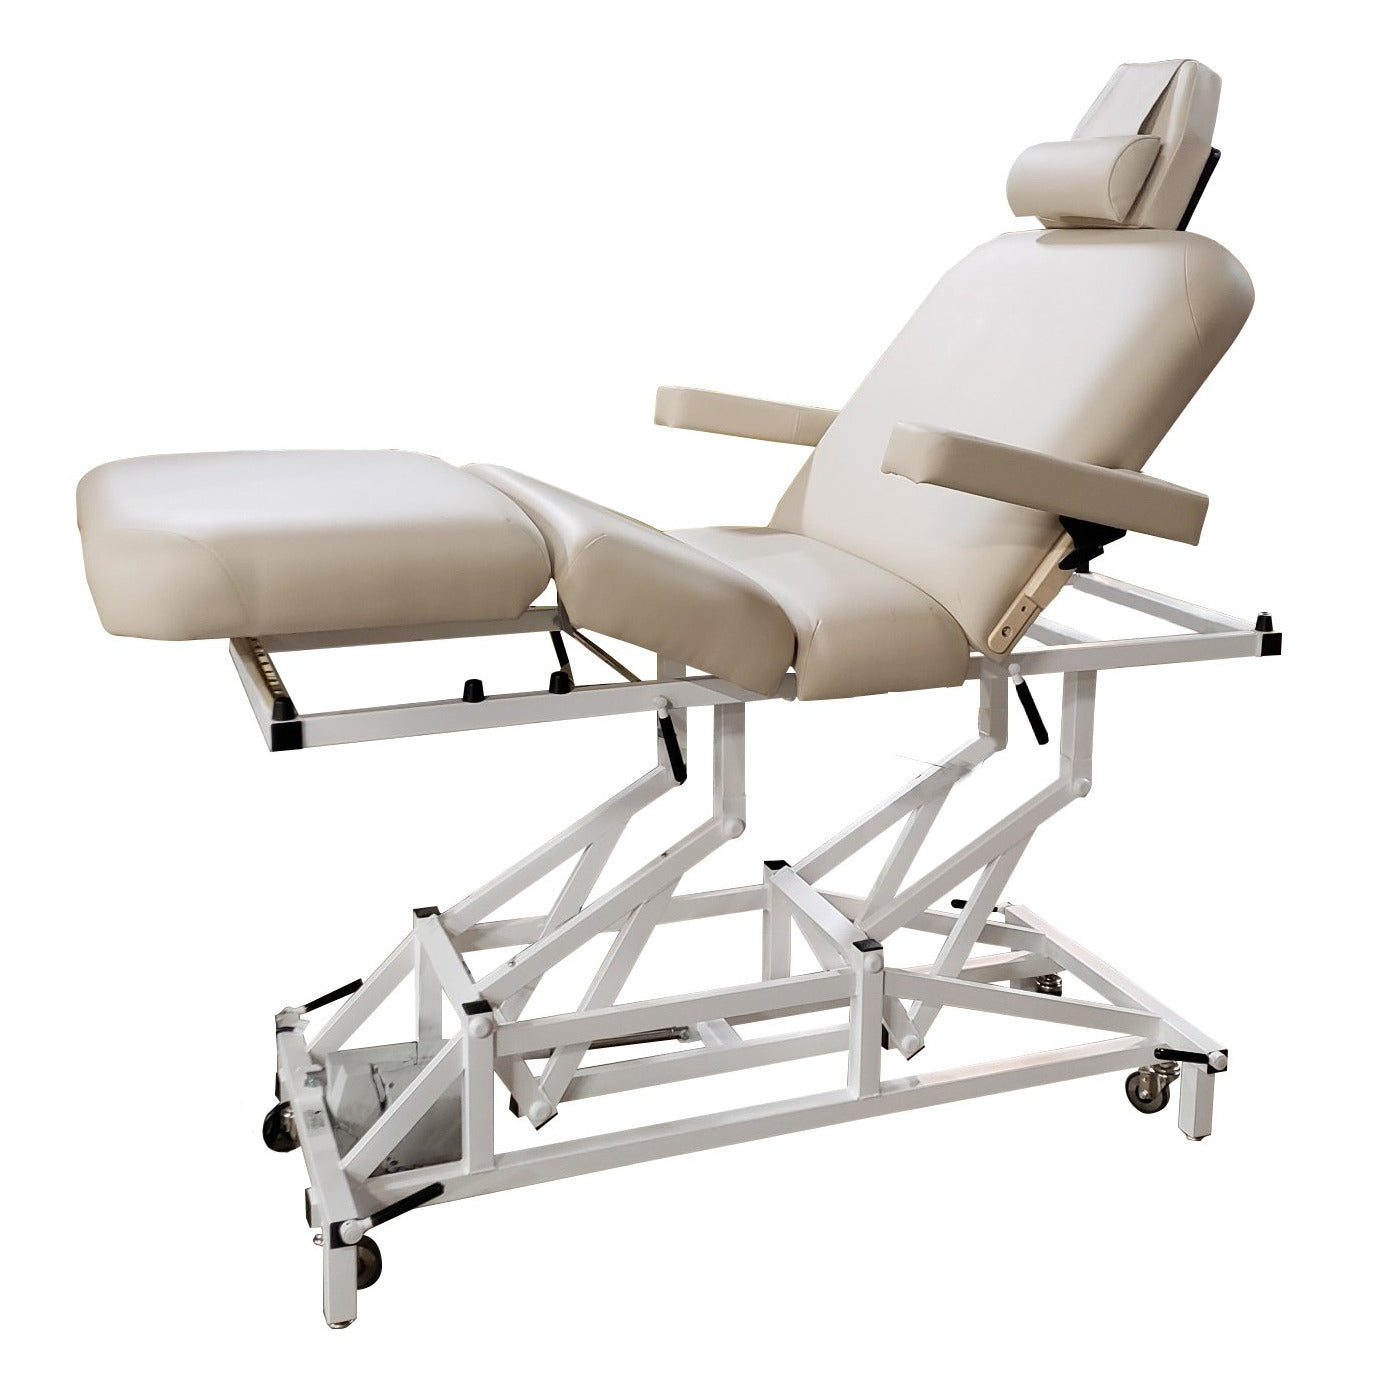 Custom Craftworks Mckenzie Deluxe Electric Lift Massage Table